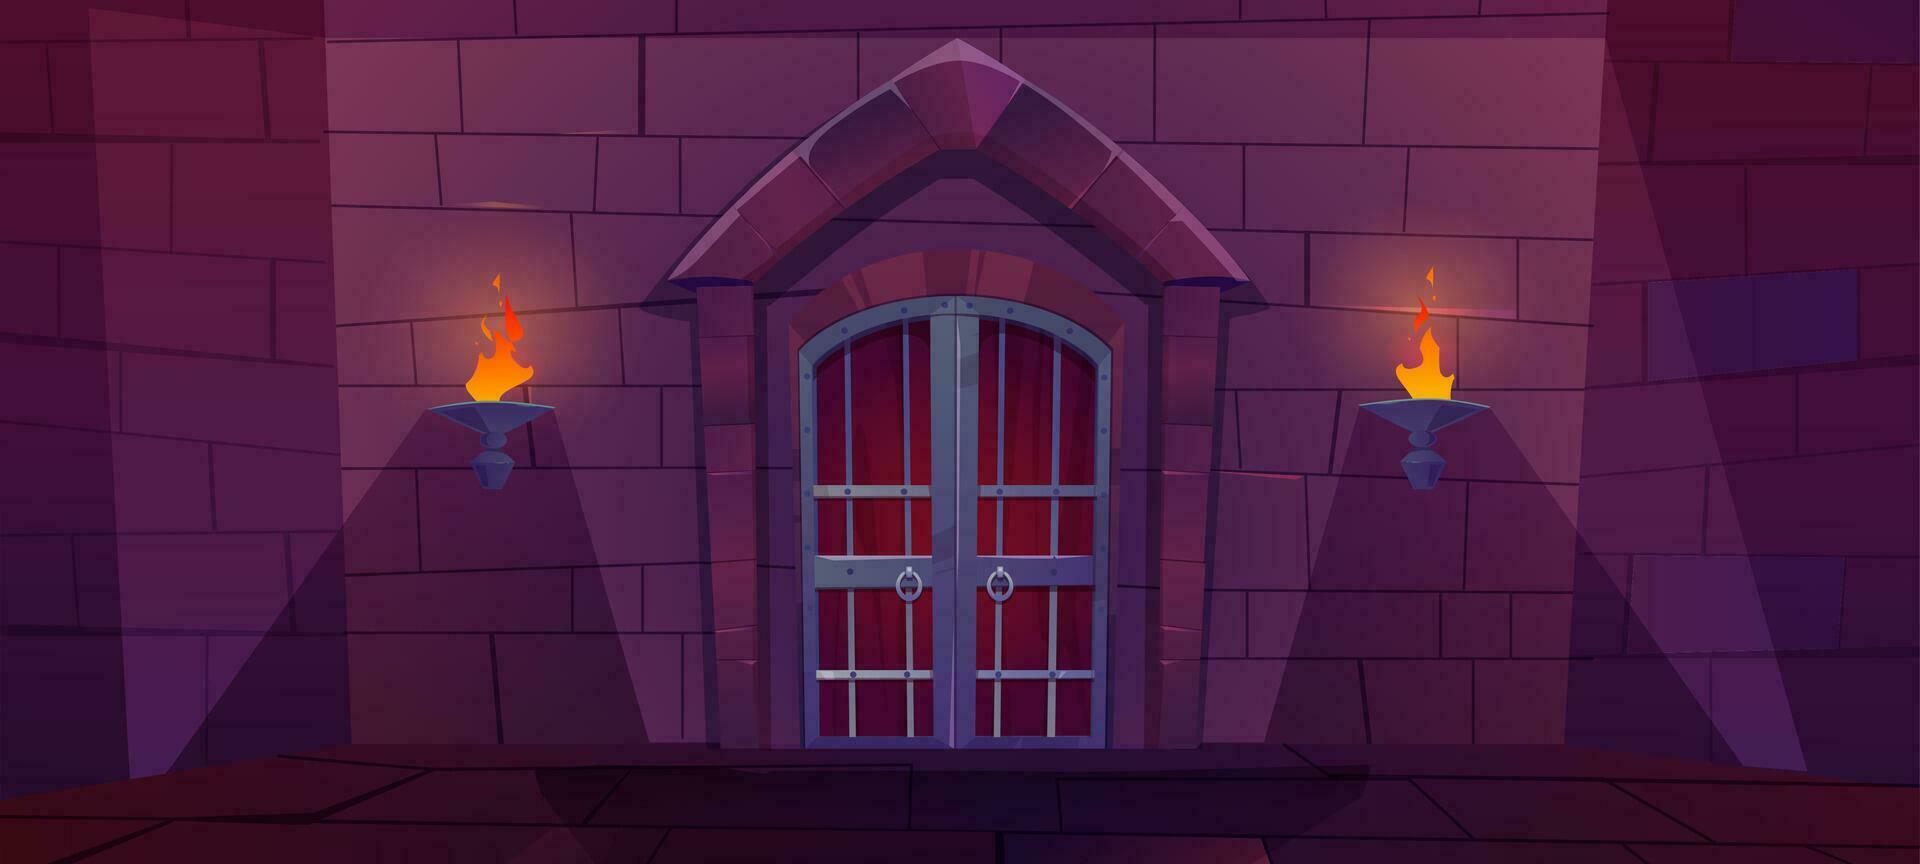 Castle dungeon wall cartoon background for game vector